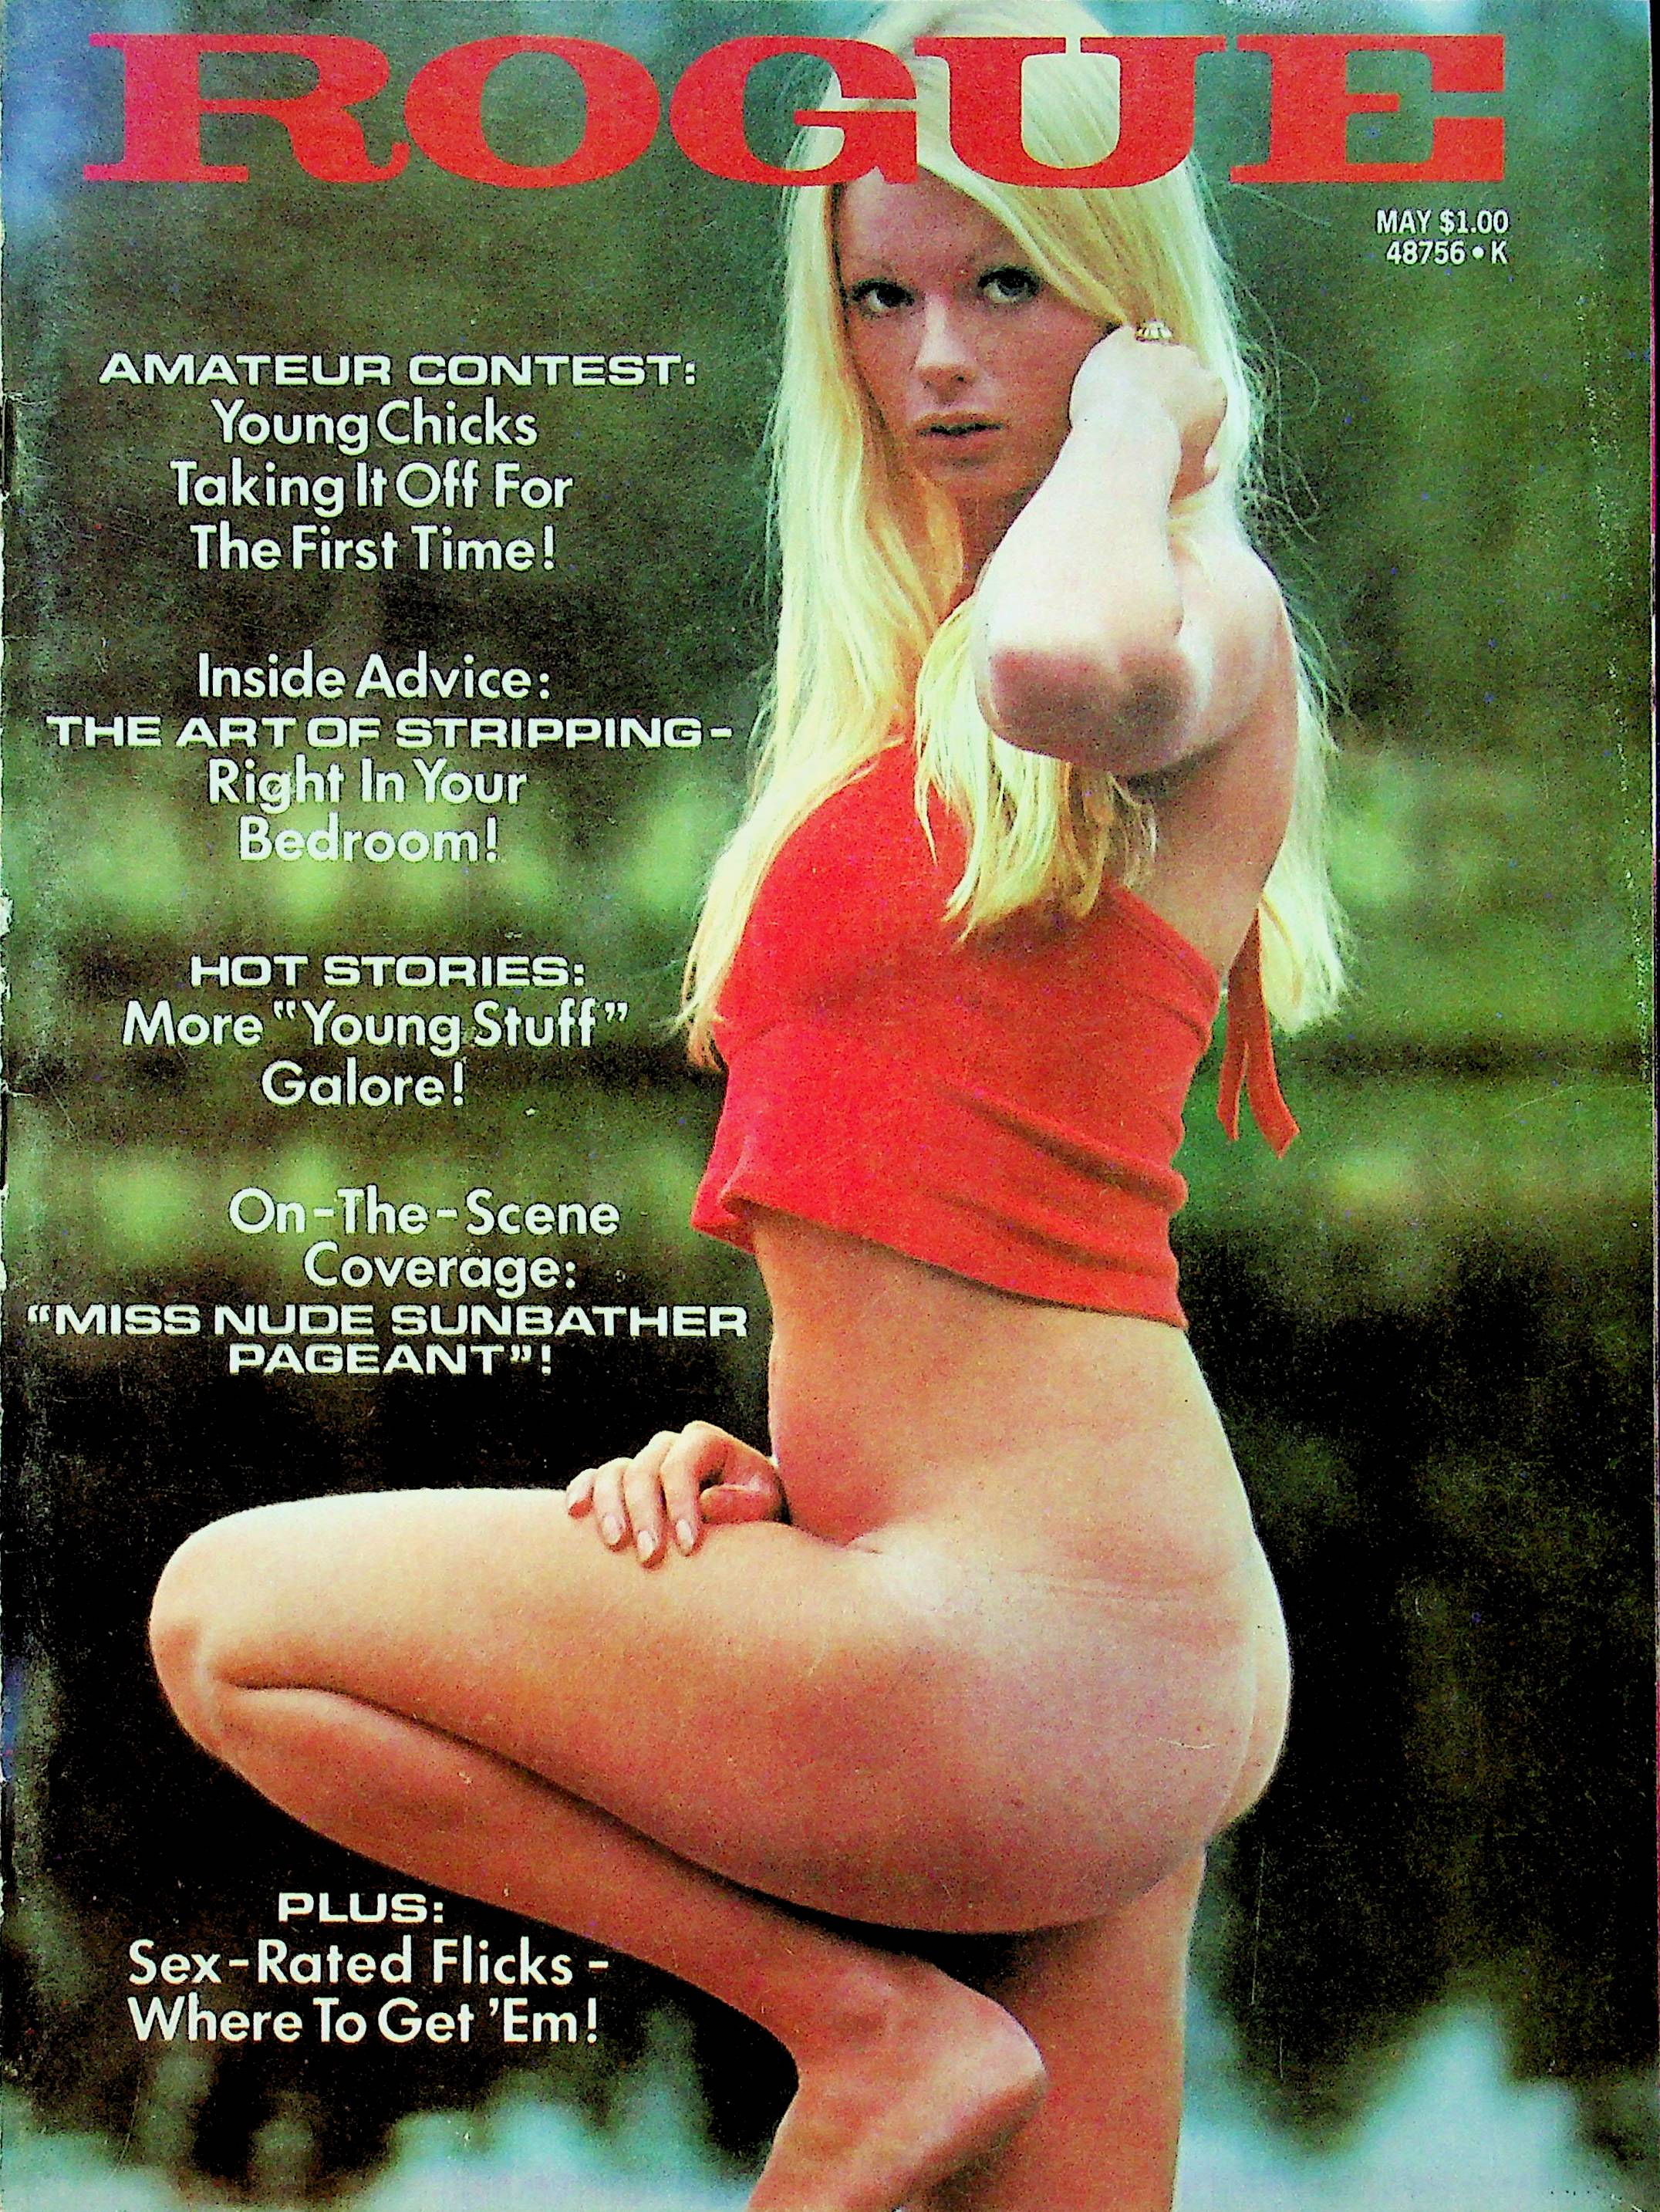 Rogue Adult Magazine Miss Nude Sunbather Pageant Bunny and Bev May 1973 photo